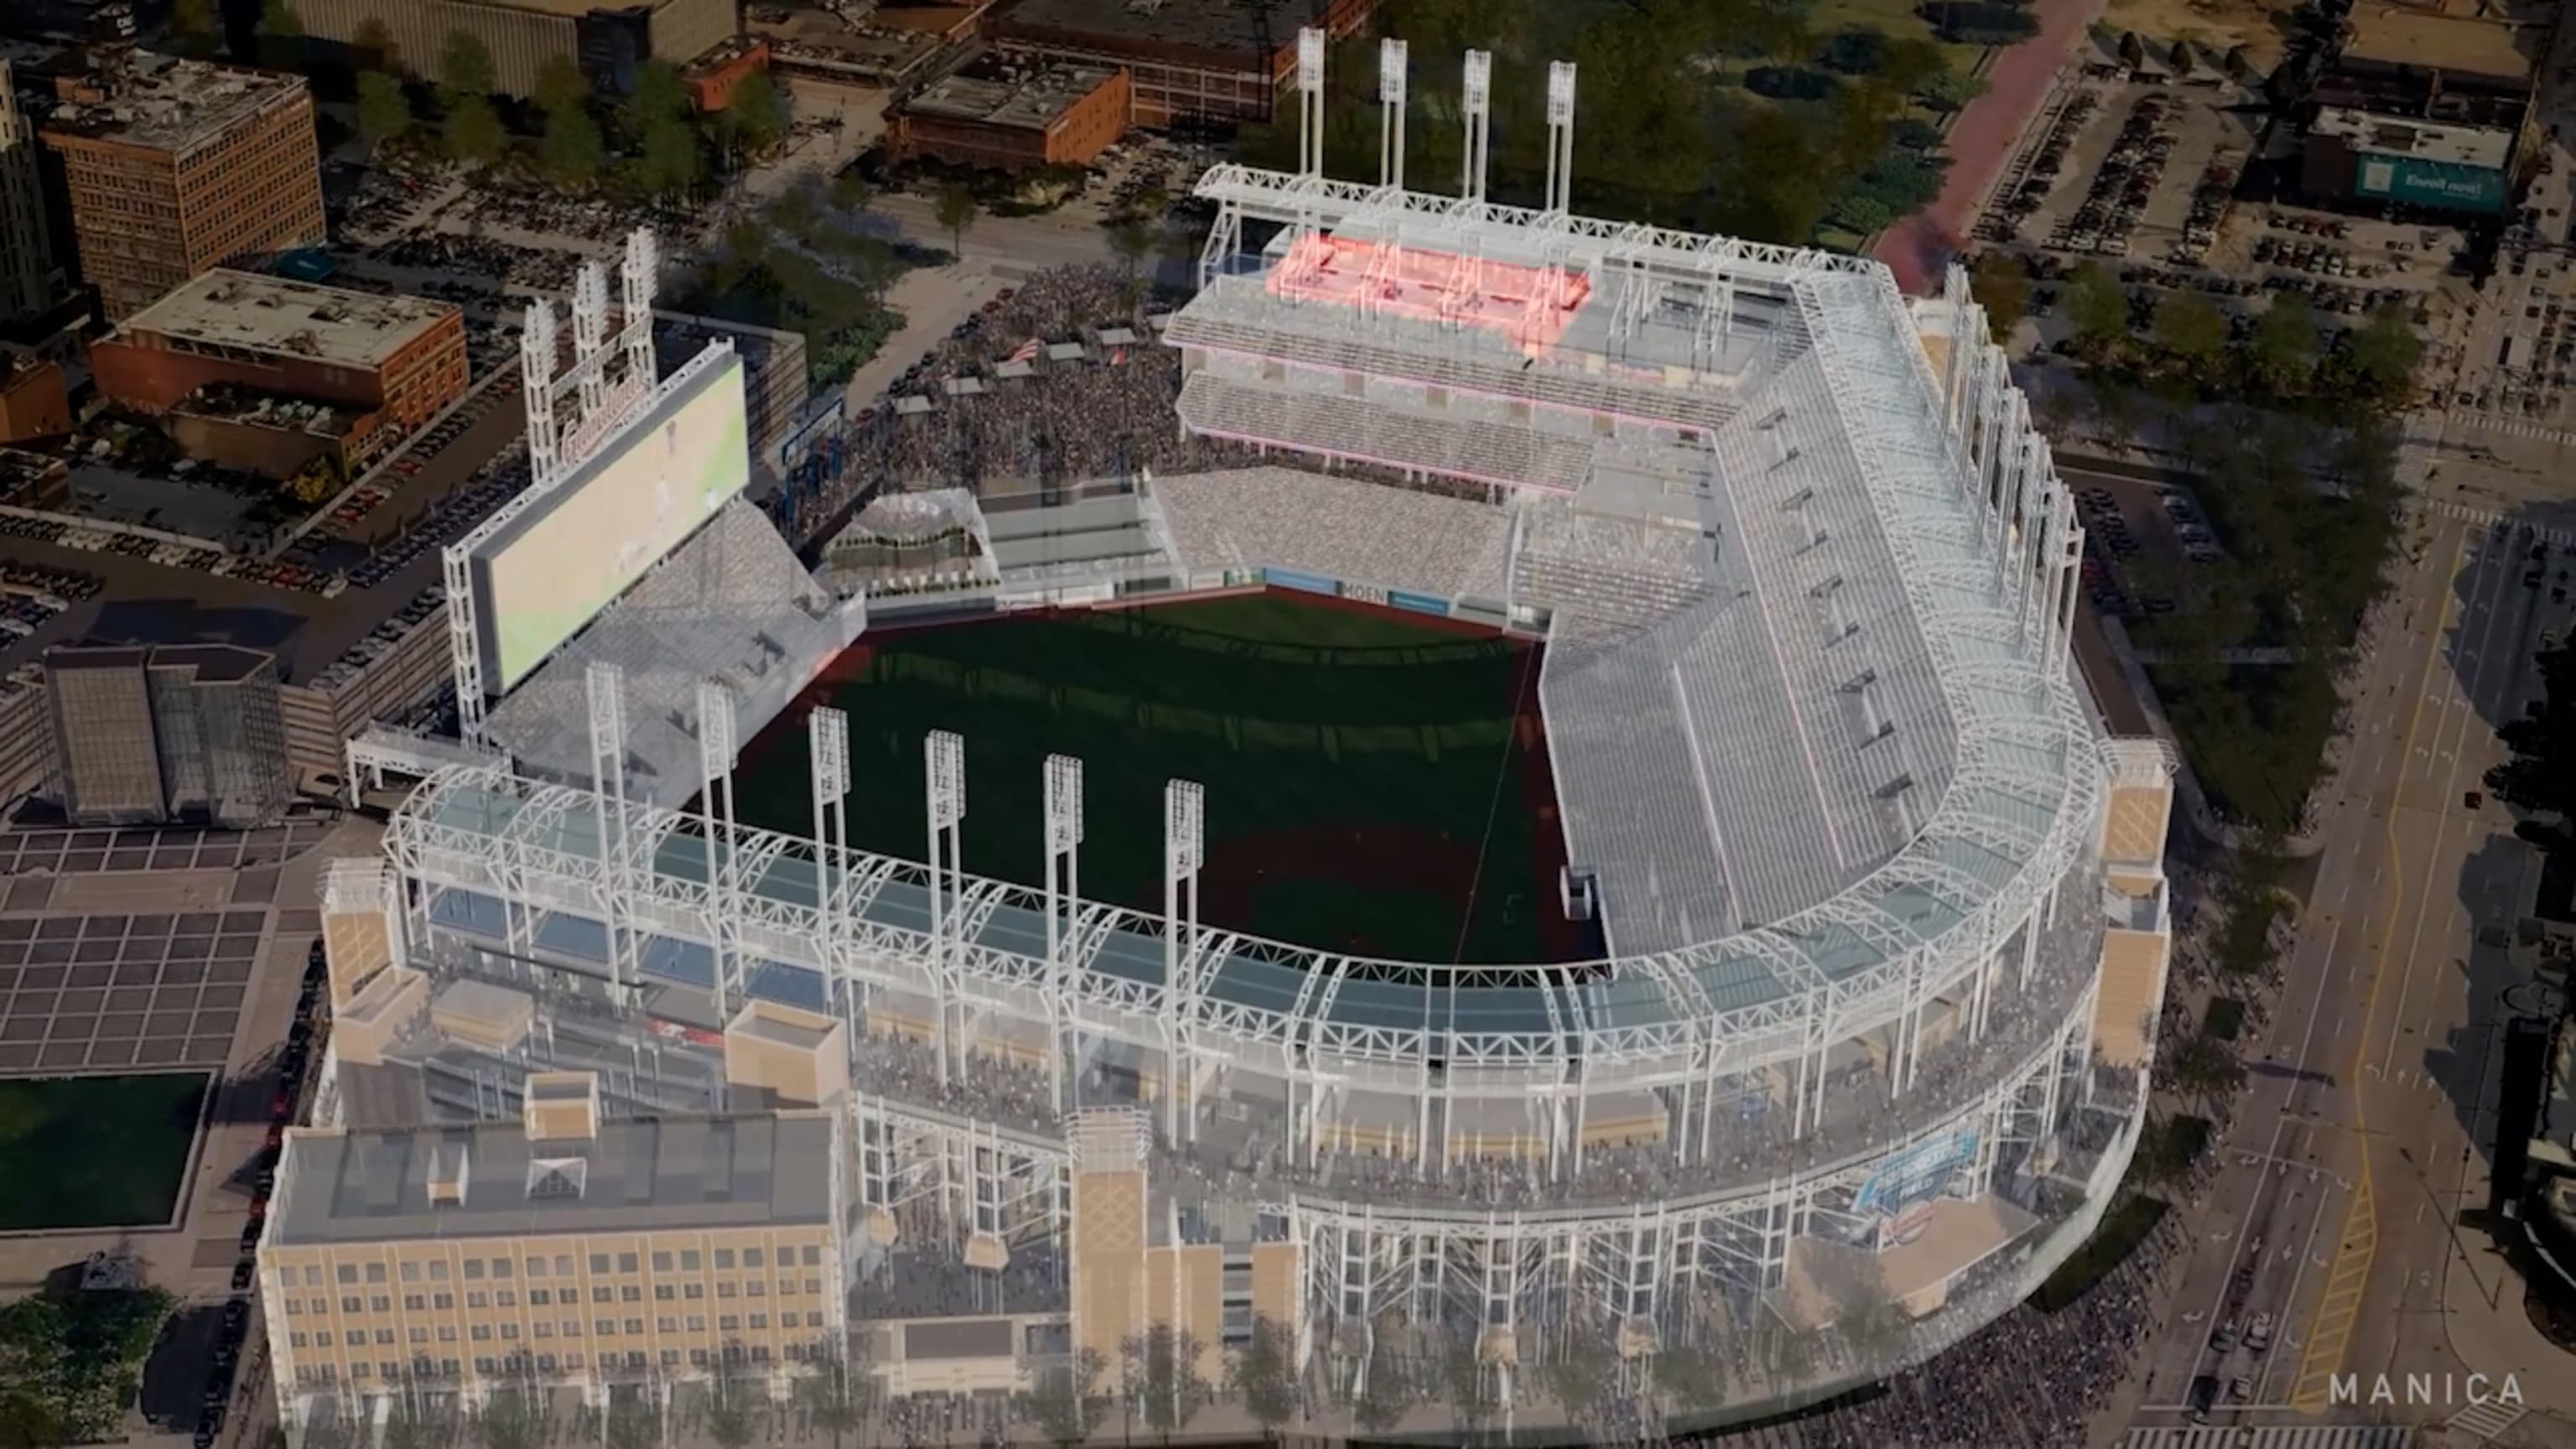 Progressive Field - Ballpark of the Cleveland Indians - The Jake